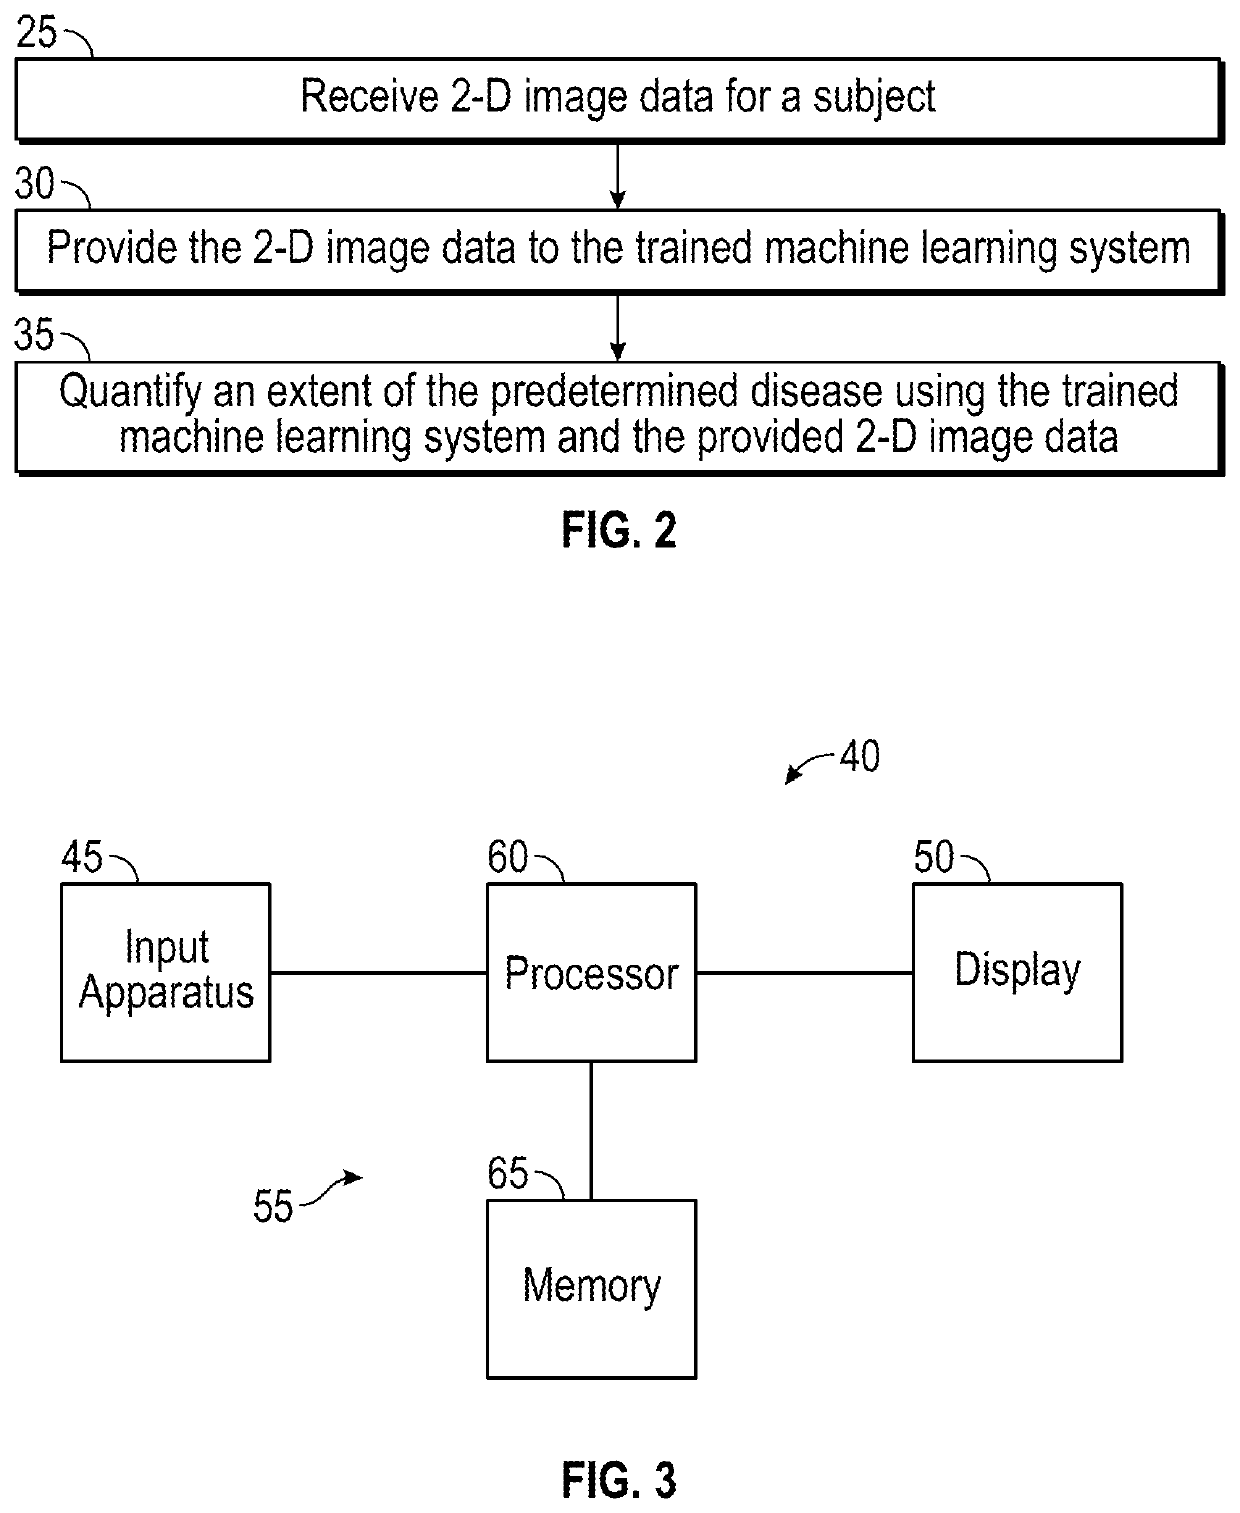 System and method for quantifying the extent of disease from 2-d images